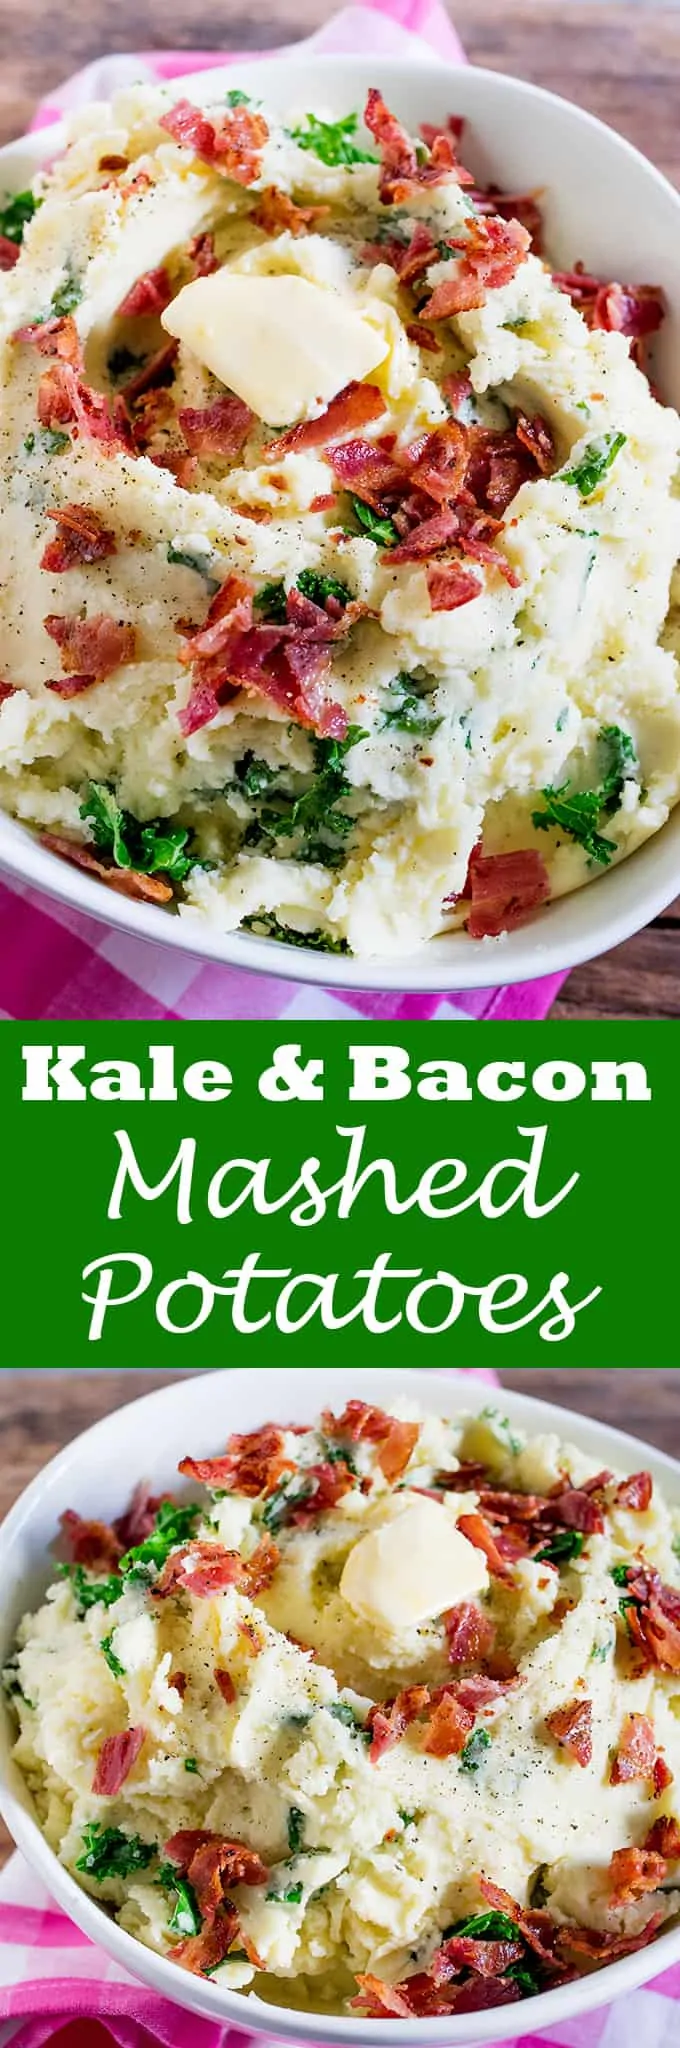 Buttery Kale and Bacon Mashed Potatoes makes a great side dish - or even a meal in itself! Perfect as a side dish for Christmas or Thanksgiving.